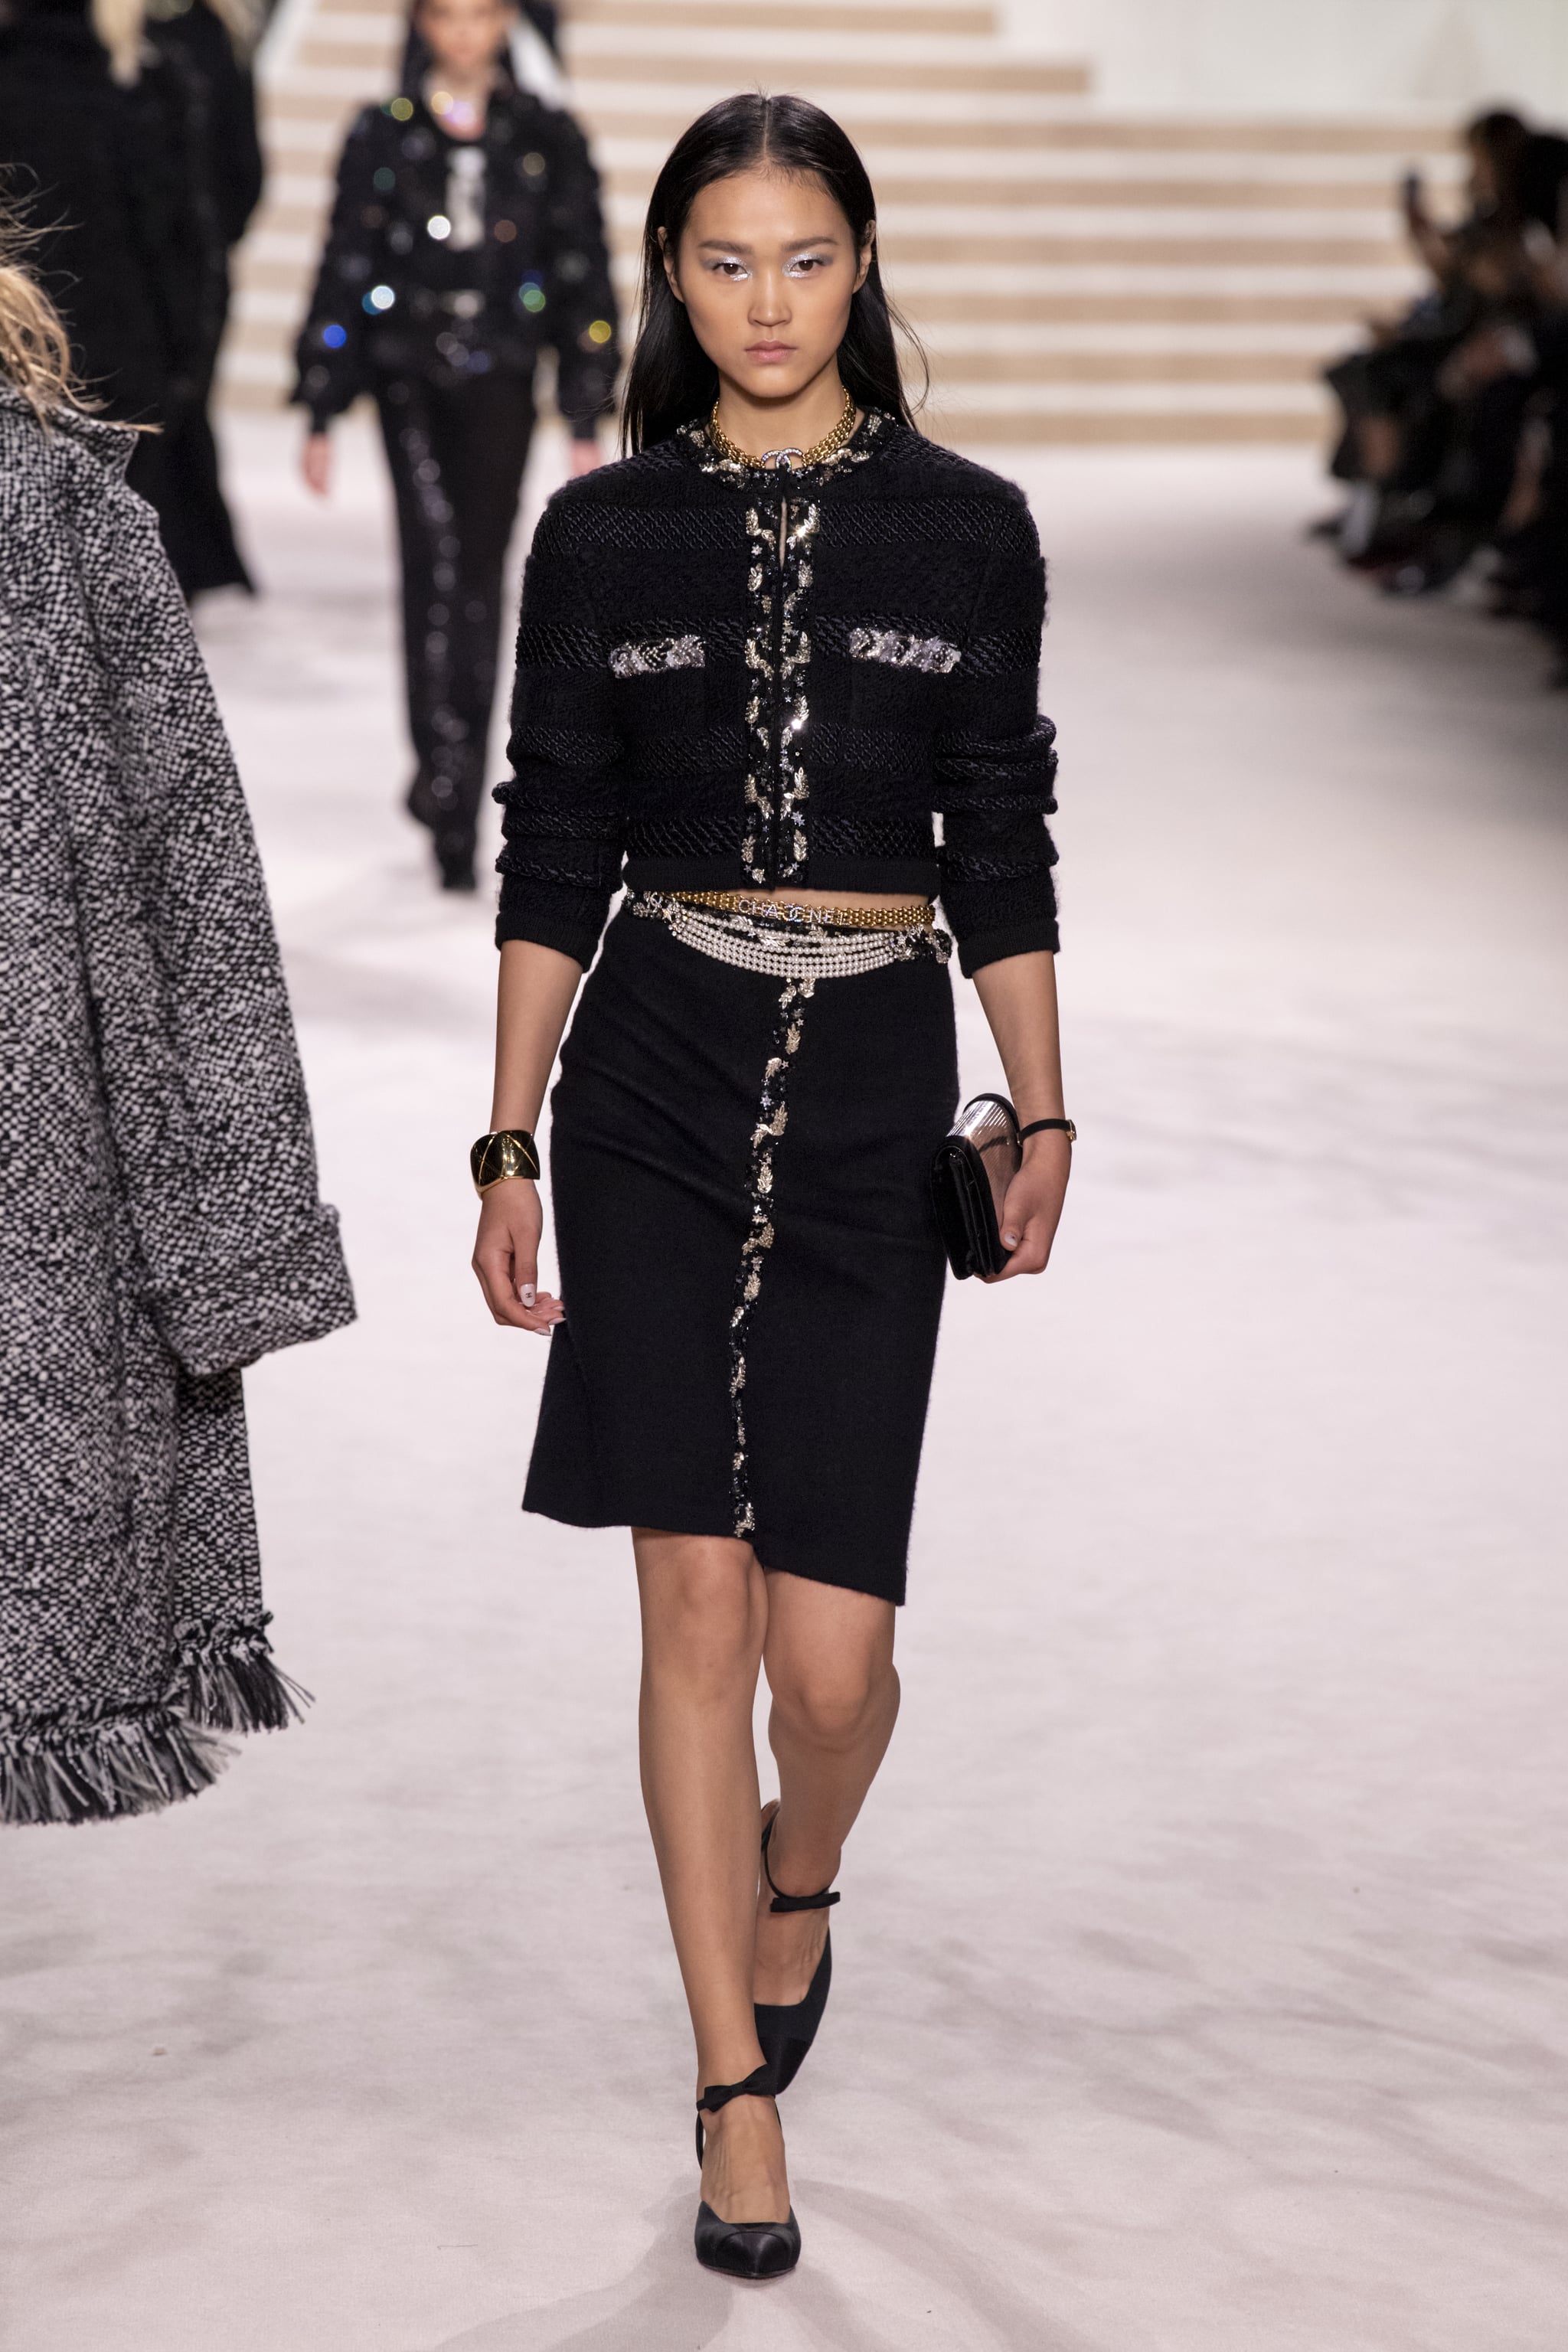 Chanel Pre-Fall 2020 collection, runway looks, beauty, models, and